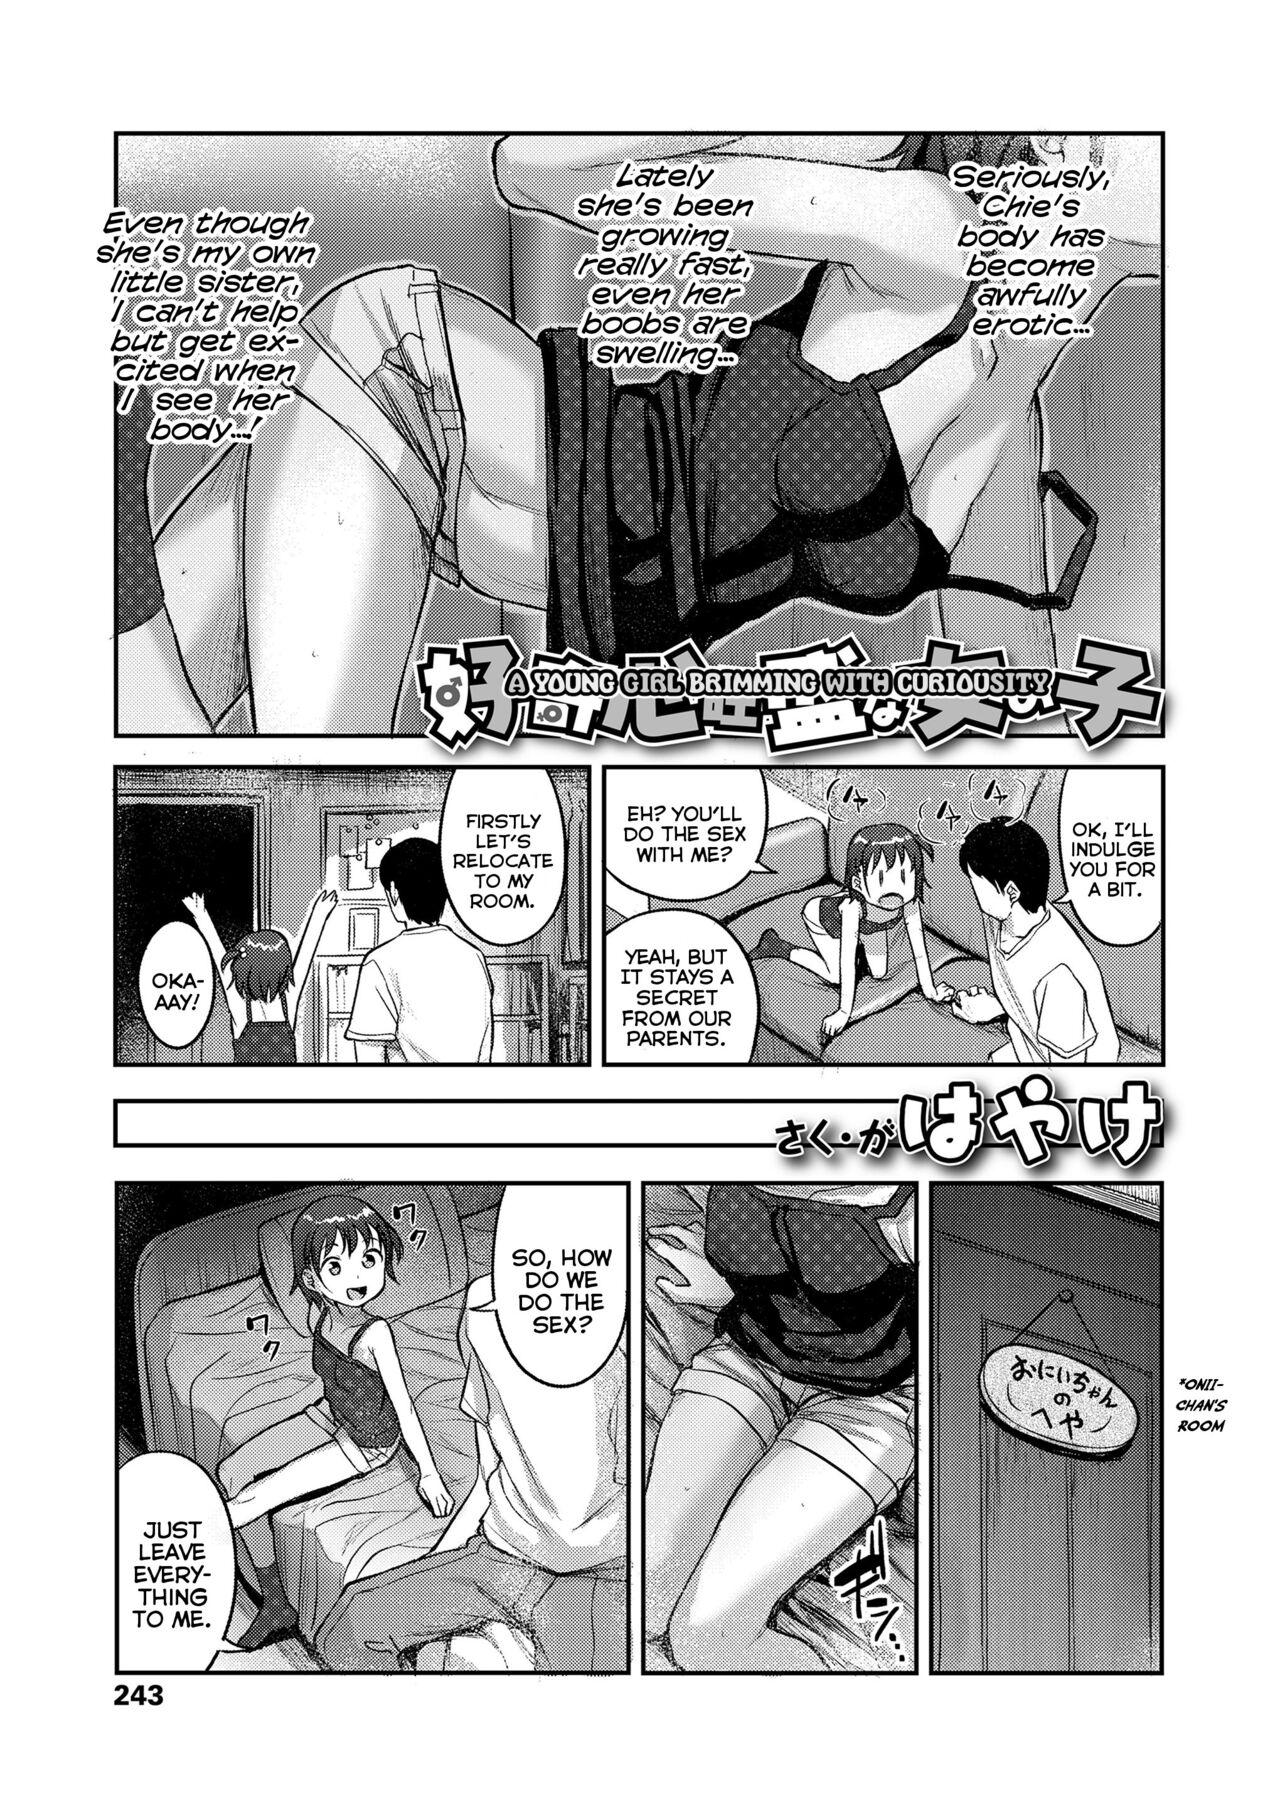 Solo Koukishin Ousei na Onnanoko | A Young Girl Brimming With Curiousity Newbie - Page 3